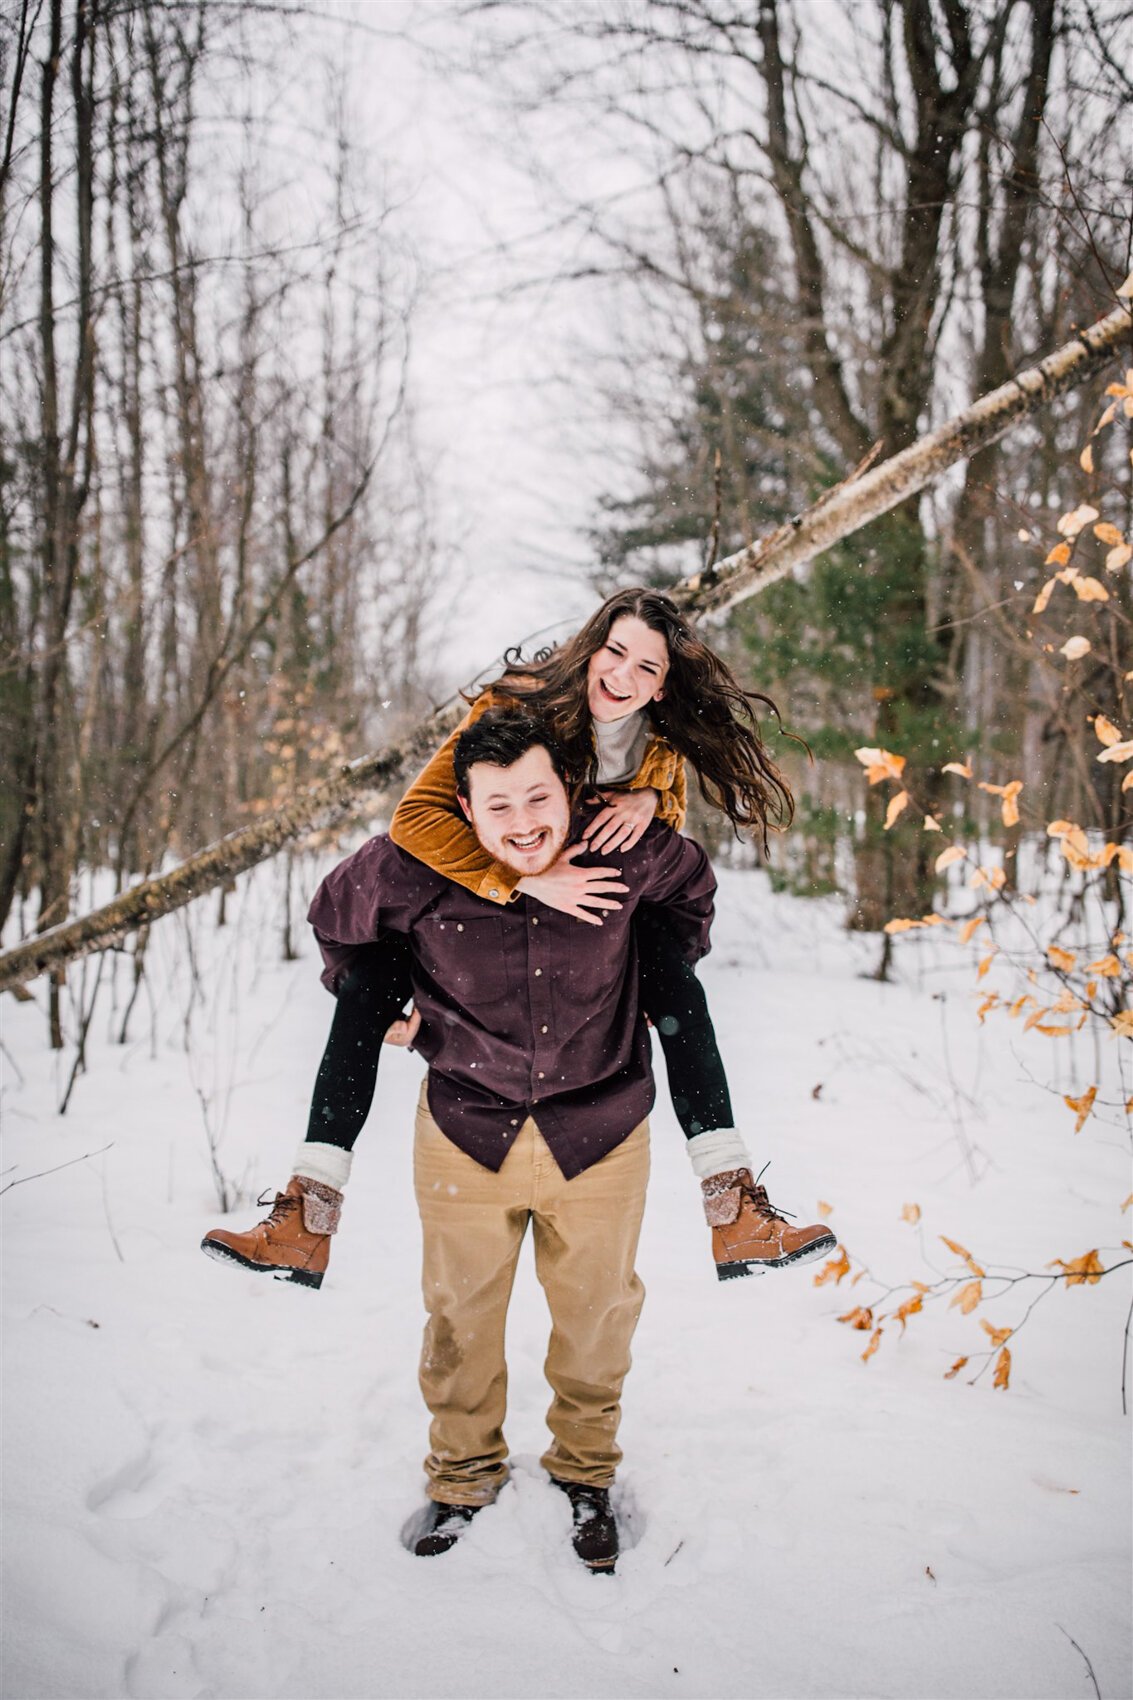 Carlie-and-Joe-Engagement-Pictures-Winter-2020-25.jpg